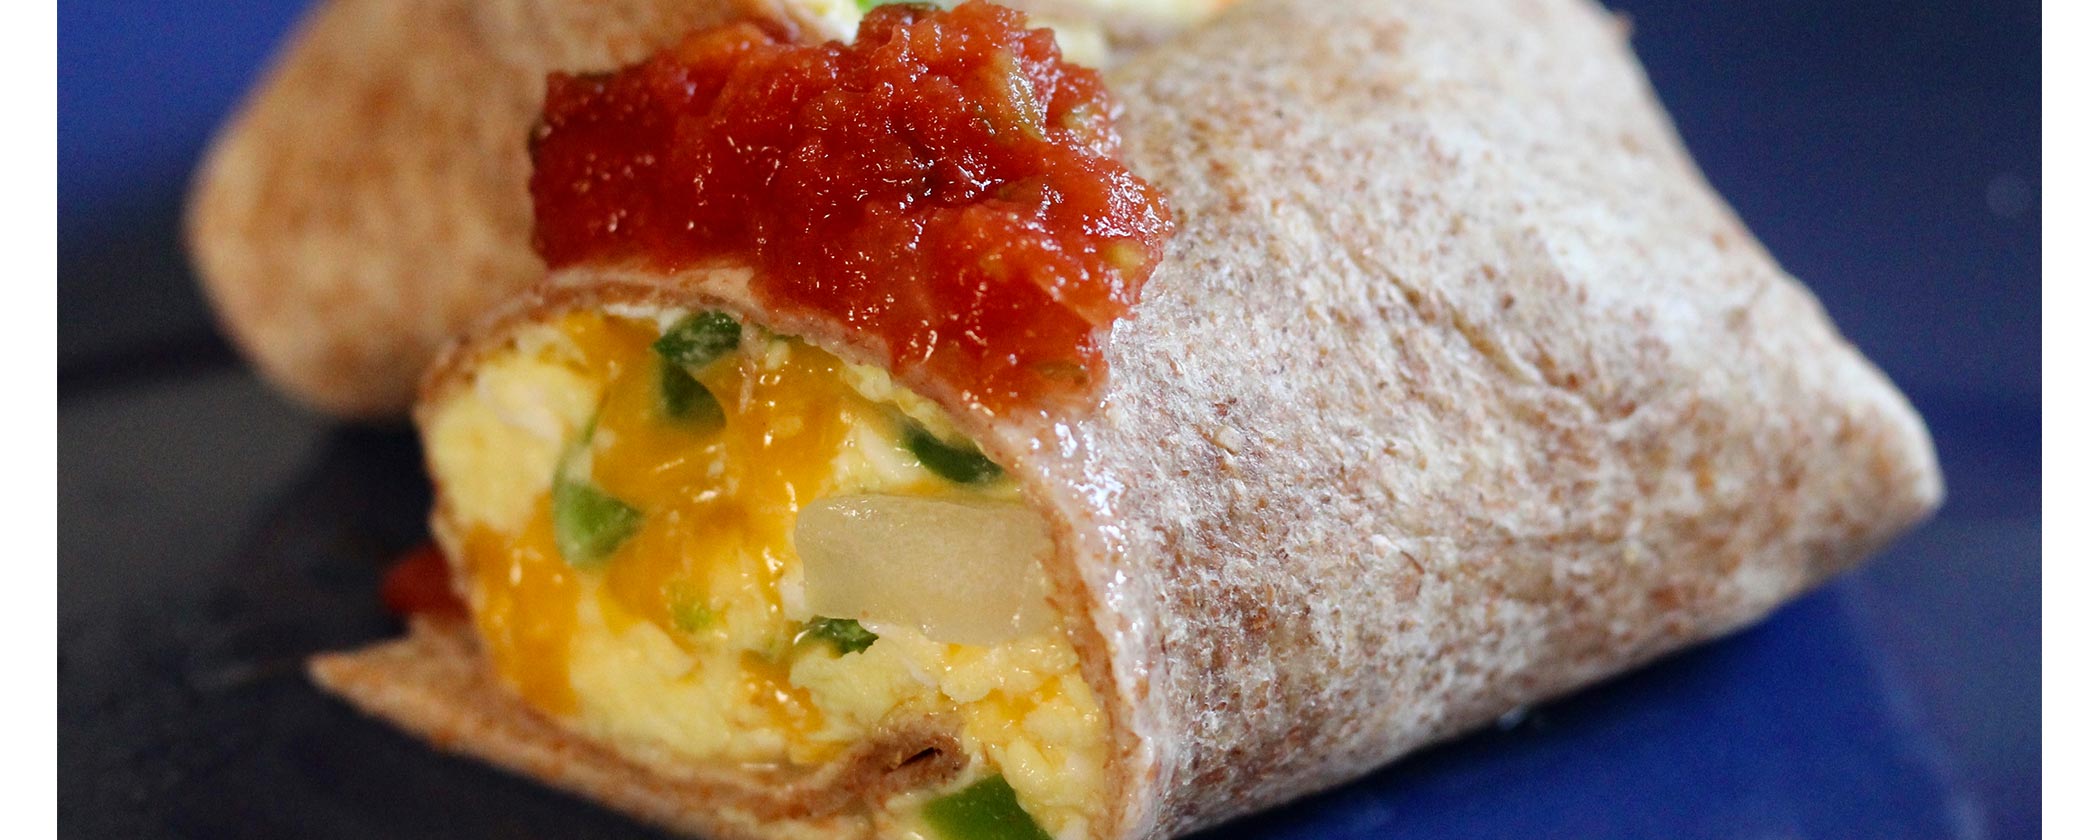 featured image for Mainely Dish: Brunching Burritos